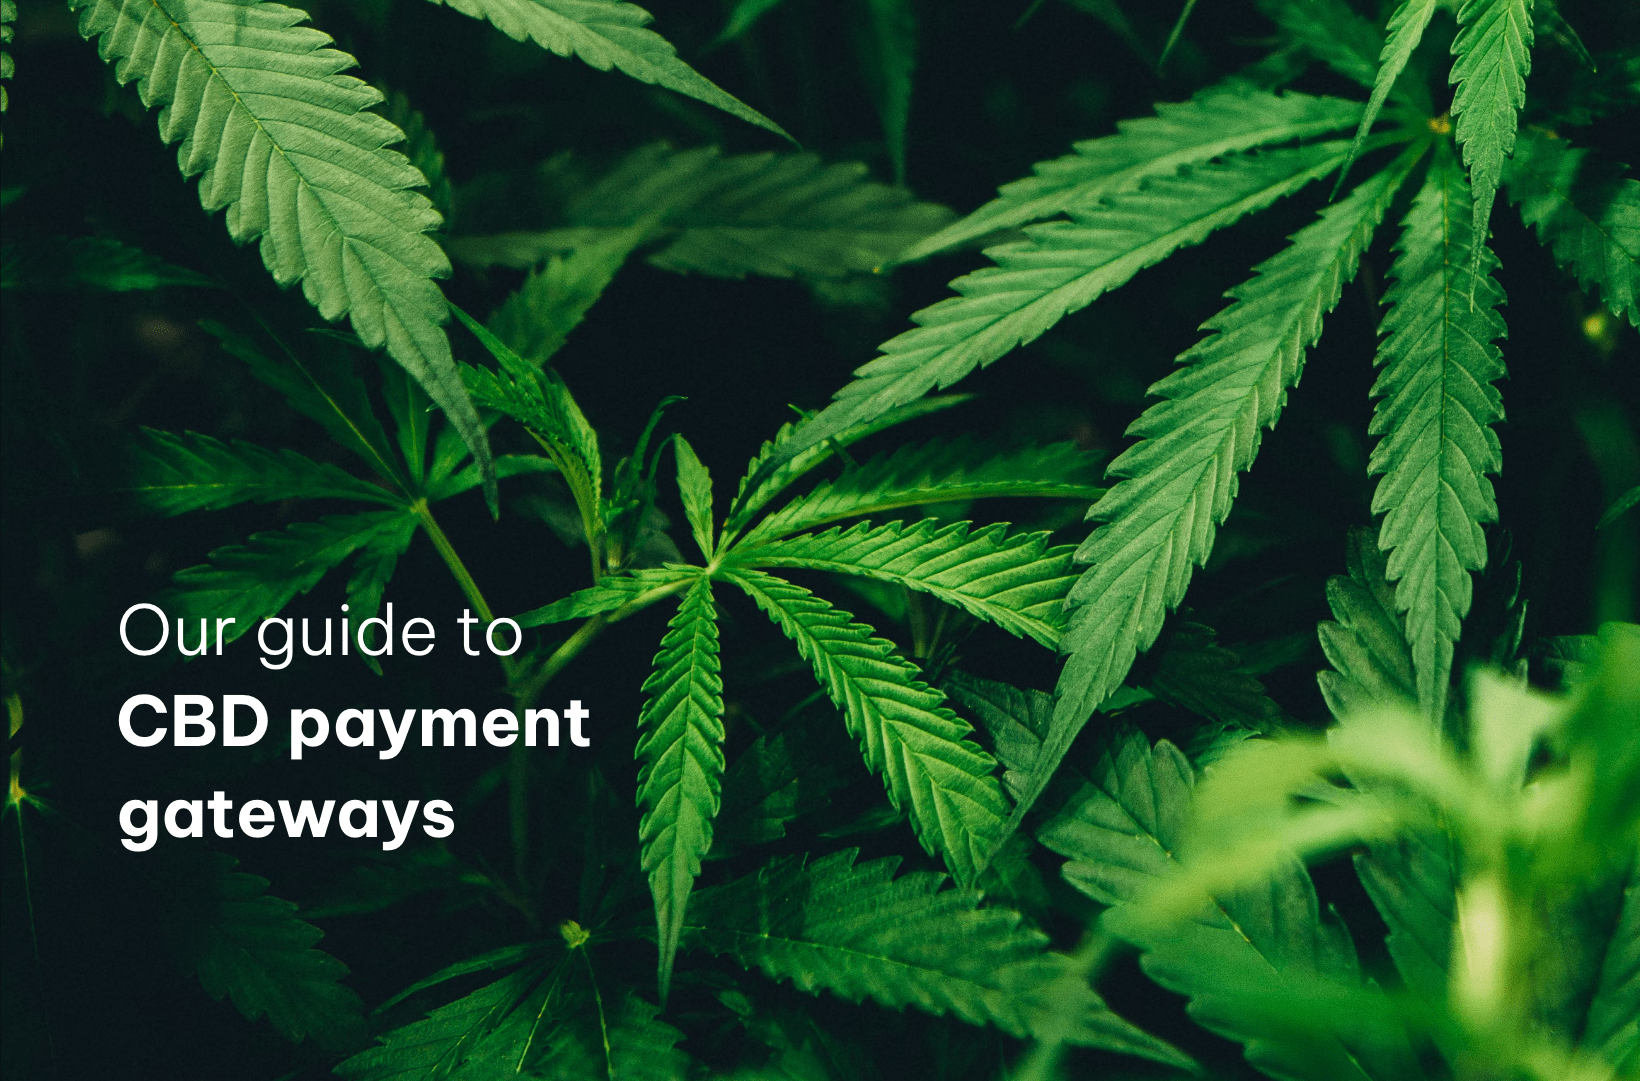 Our guide to CBD payment gateways